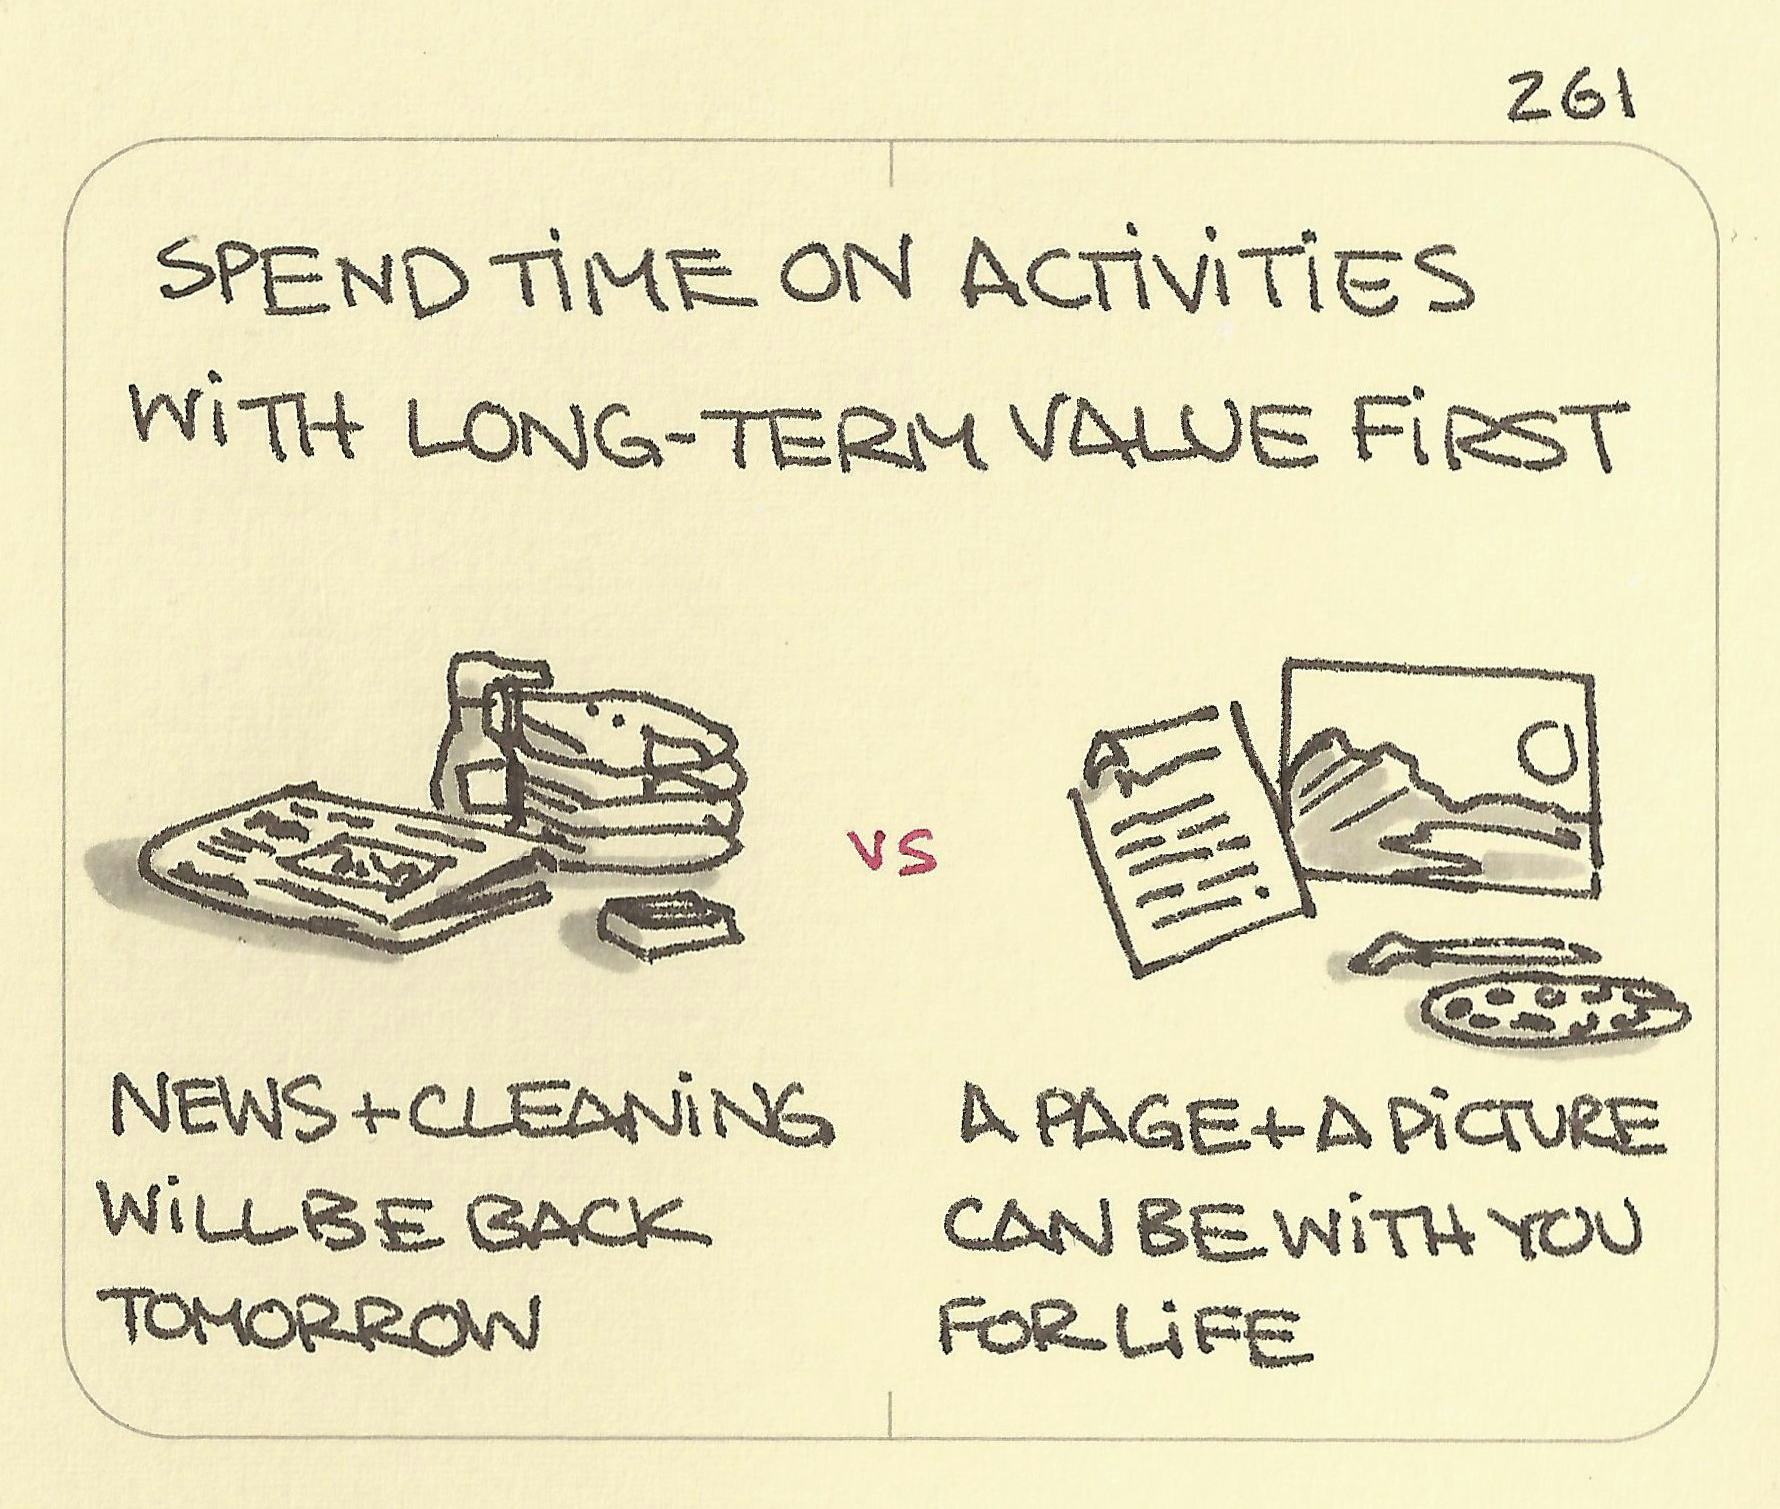 Spend time on activities with long-term value first - Sketchplanations